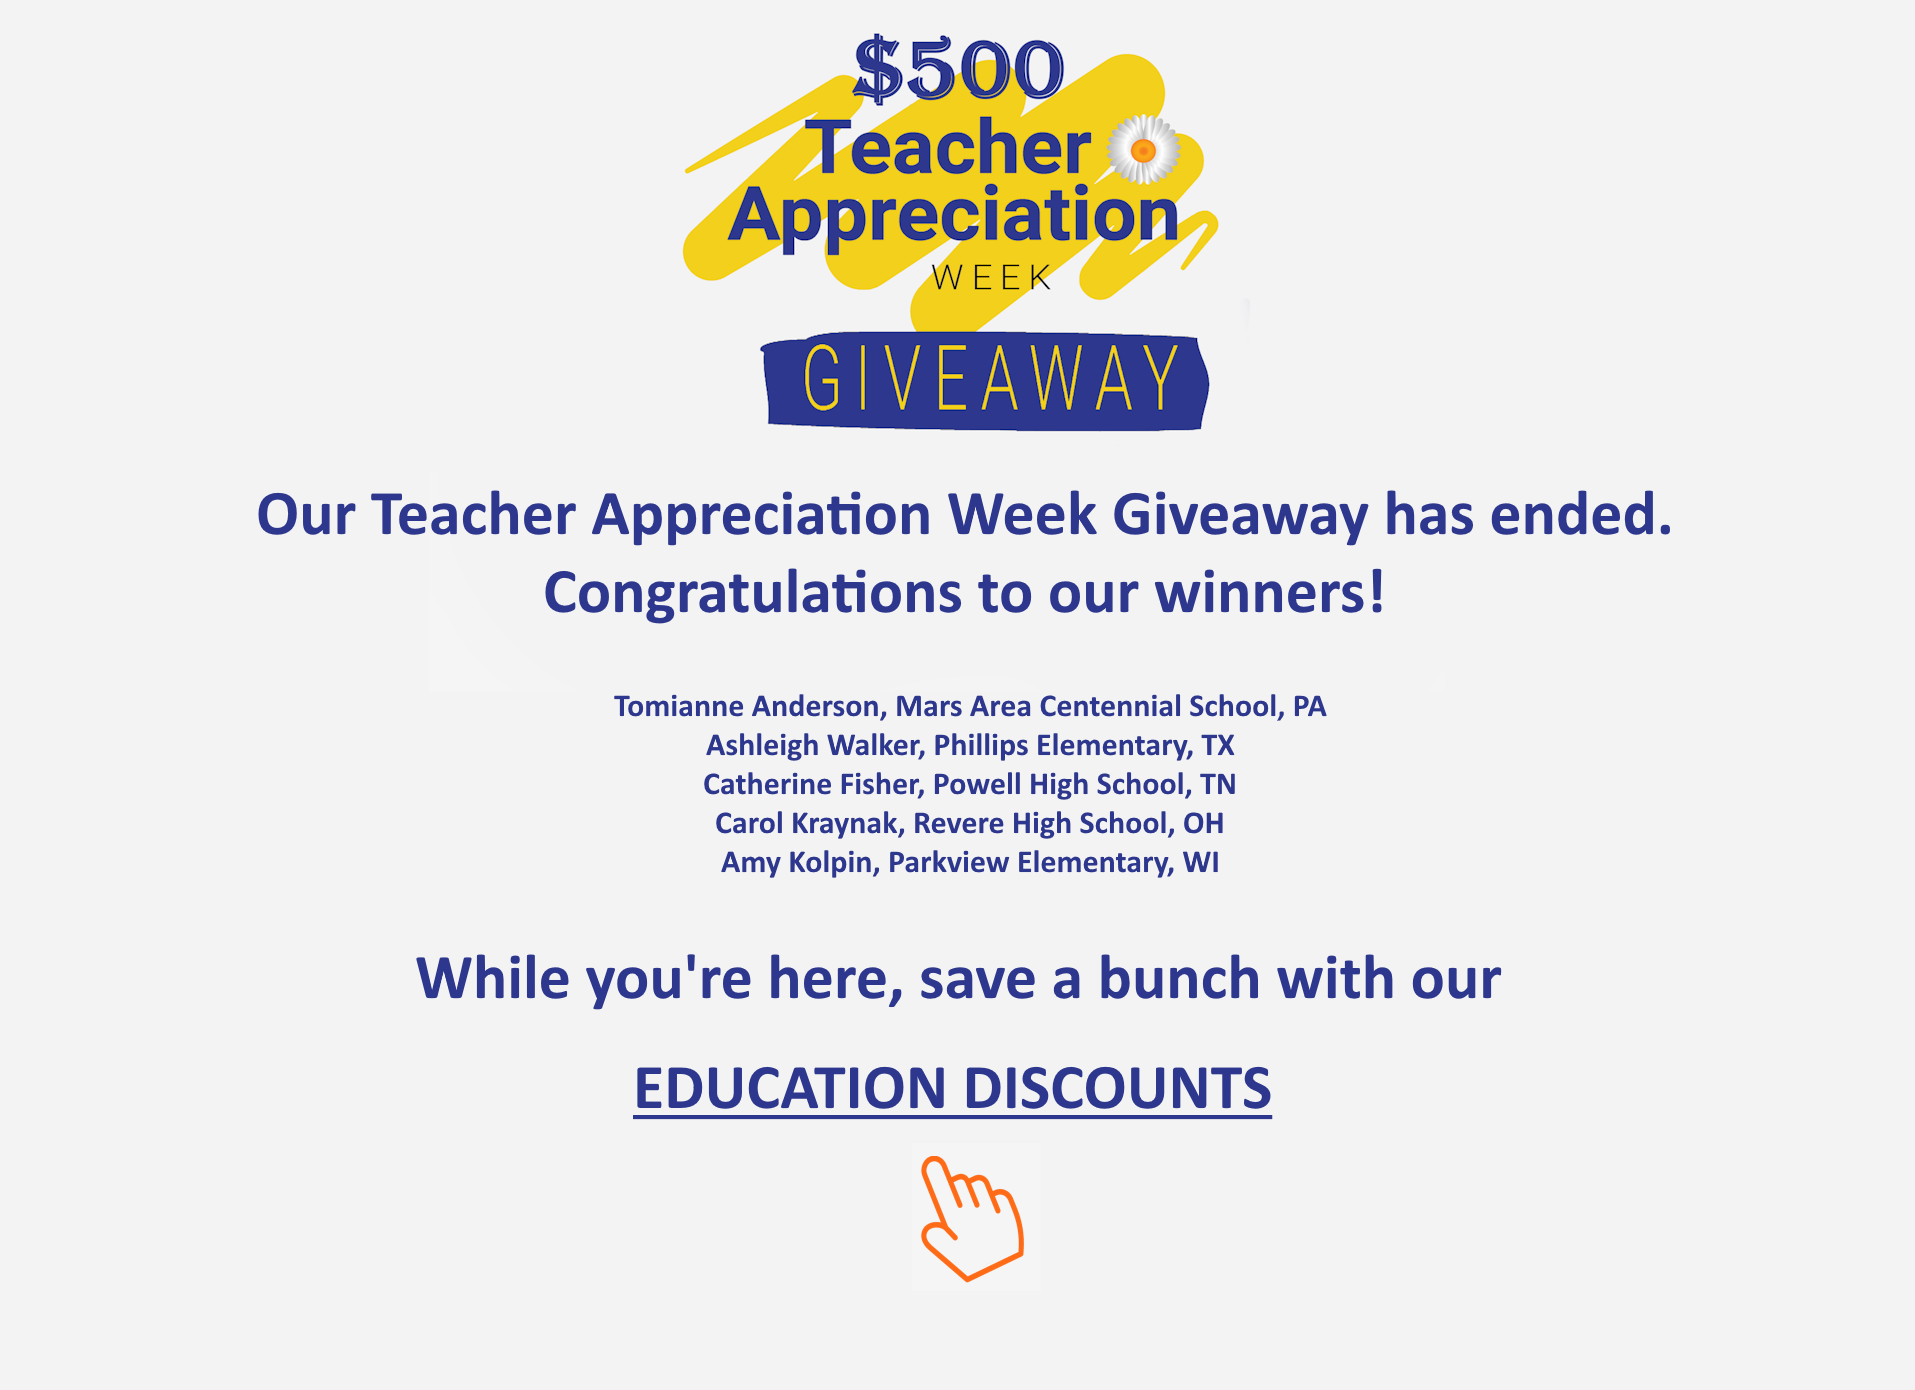 Teacher Appreciation Week Giveaway: My Education Discount | Amazon Gift Card Giveaway